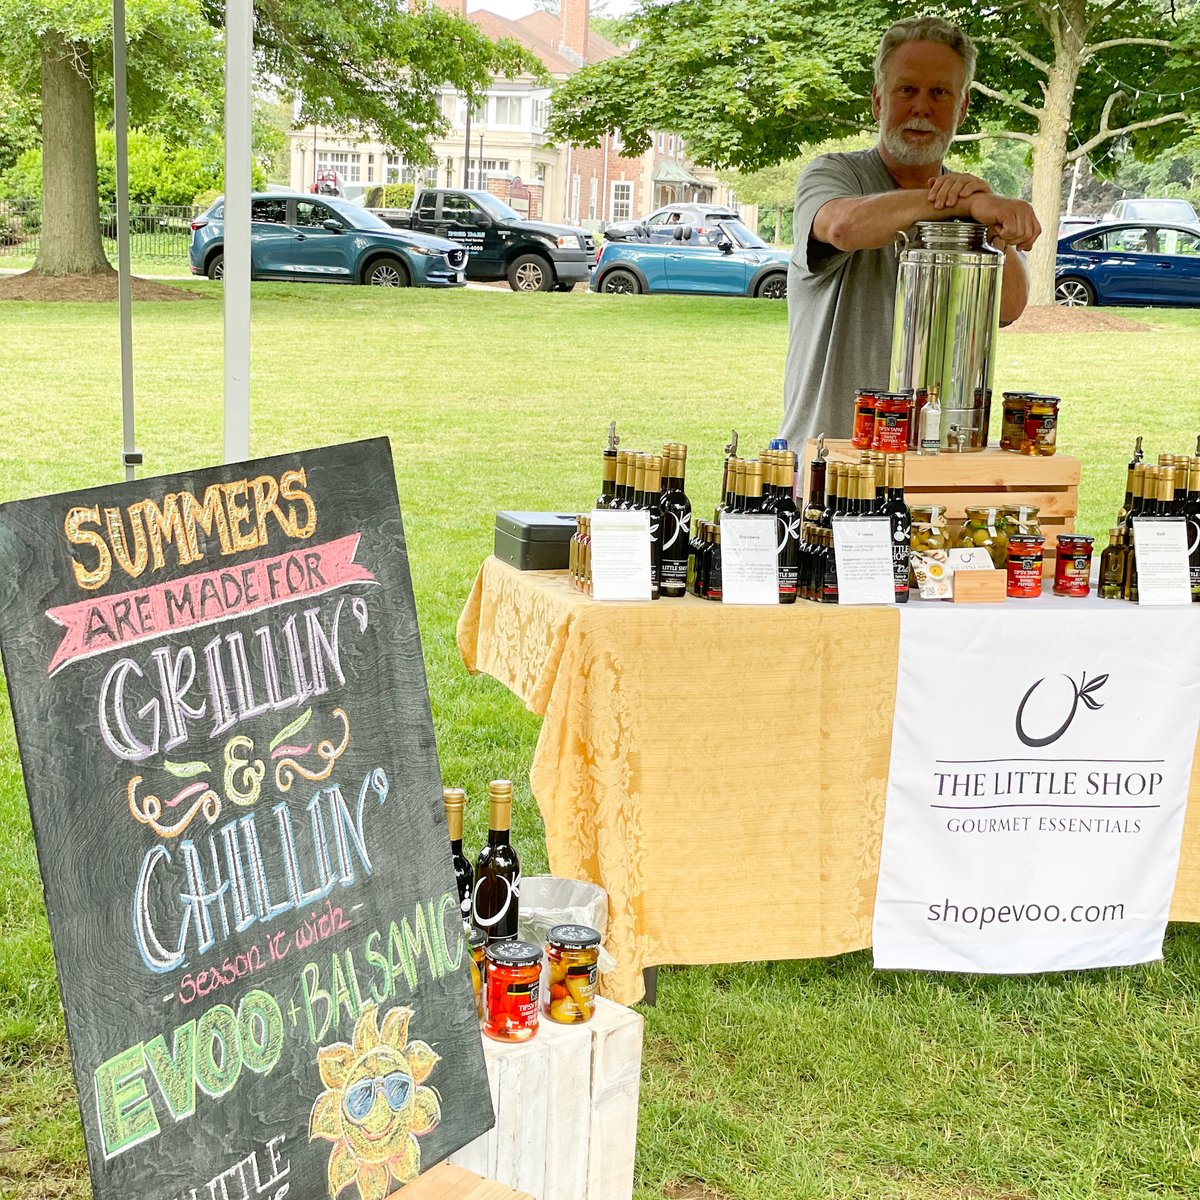 Family owned and operated!
Come see us at Franklin Farmers Market or visit one of our shops for everything you need for 'grillin' and chillin'. EVOO, Balsamic, spices, and more. ENJOY! 
Learn More   👉franklinfarmersmarketma.com/events
*
*
*
 #franklinfarmersmarket #weekend #franklinma